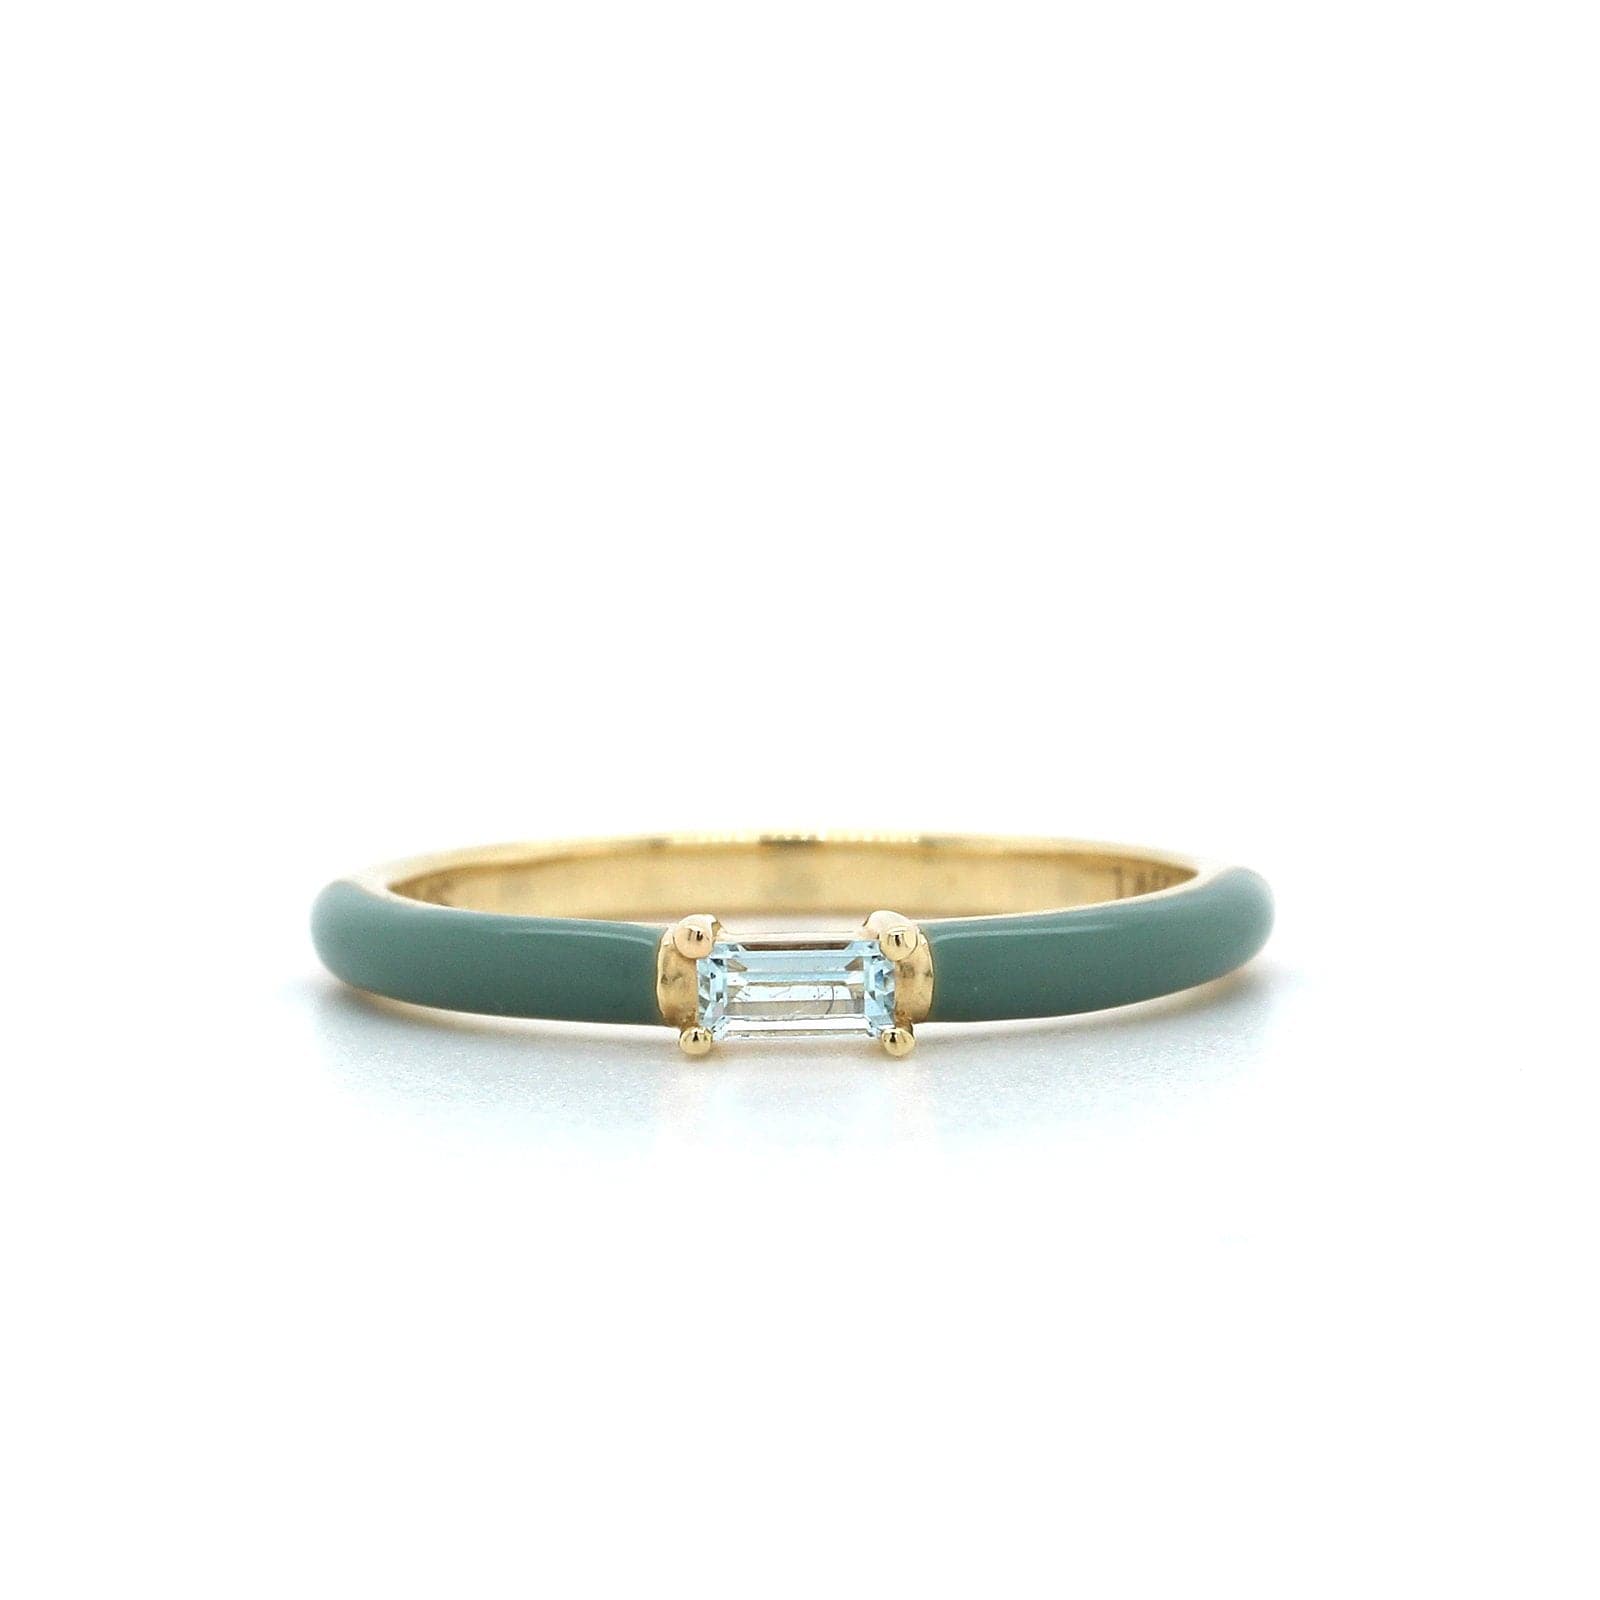 The Eloise 14K Yellow Gold Aquamarine with Pebble Enamel Ring, 14K Yellow Gold, Long's Jewelers